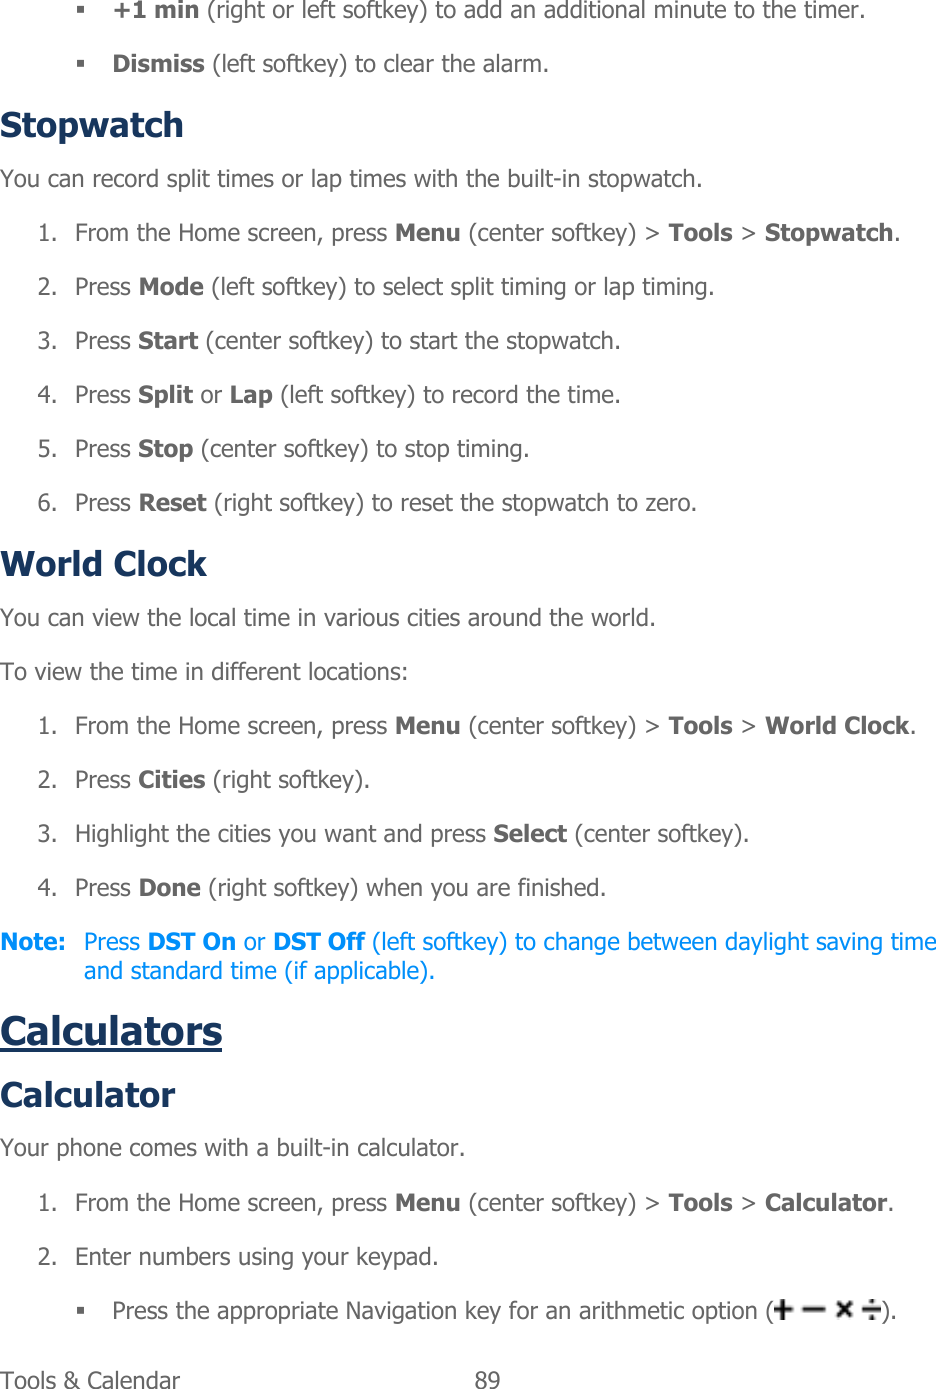  Tools &amp; Calendar  89    +1 min (right or left softkey) to add an additional minute to the timer.  Dismiss (left softkey) to clear the alarm. Stopwatch You can record split times or lap times with the built-in stopwatch. 1. From the Home screen, press Menu (center softkey) &gt; Tools &gt; Stopwatch. 2. Press Mode (left softkey) to select split timing or lap timing. 3. Press Start (center softkey) to start the stopwatch. 4. Press Split or Lap (left softkey) to record the time. 5. Press Stop (center softkey) to stop timing. 6. Press Reset (right softkey) to reset the stopwatch to zero. World Clock  You can view the local time in various cities around the world. To view the time in different locations: 1. From the Home screen, press Menu (center softkey) &gt; Tools &gt; World Clock. 2. Press Cities (right softkey). 3. Highlight the cities you want and press Select (center softkey). 4. Press Done (right softkey) when you are finished. Note:  Press DST On or DST Off (left softkey) to change between daylight saving time and standard time (if applicable). Calculators Calculator Your phone comes with a built-in calculator. 1. From the Home screen, press Menu (center softkey) &gt; Tools &gt; Calculator. 2. Enter numbers using your keypad.  Press the appropriate Navigation key for an arithmetic option ( ). 